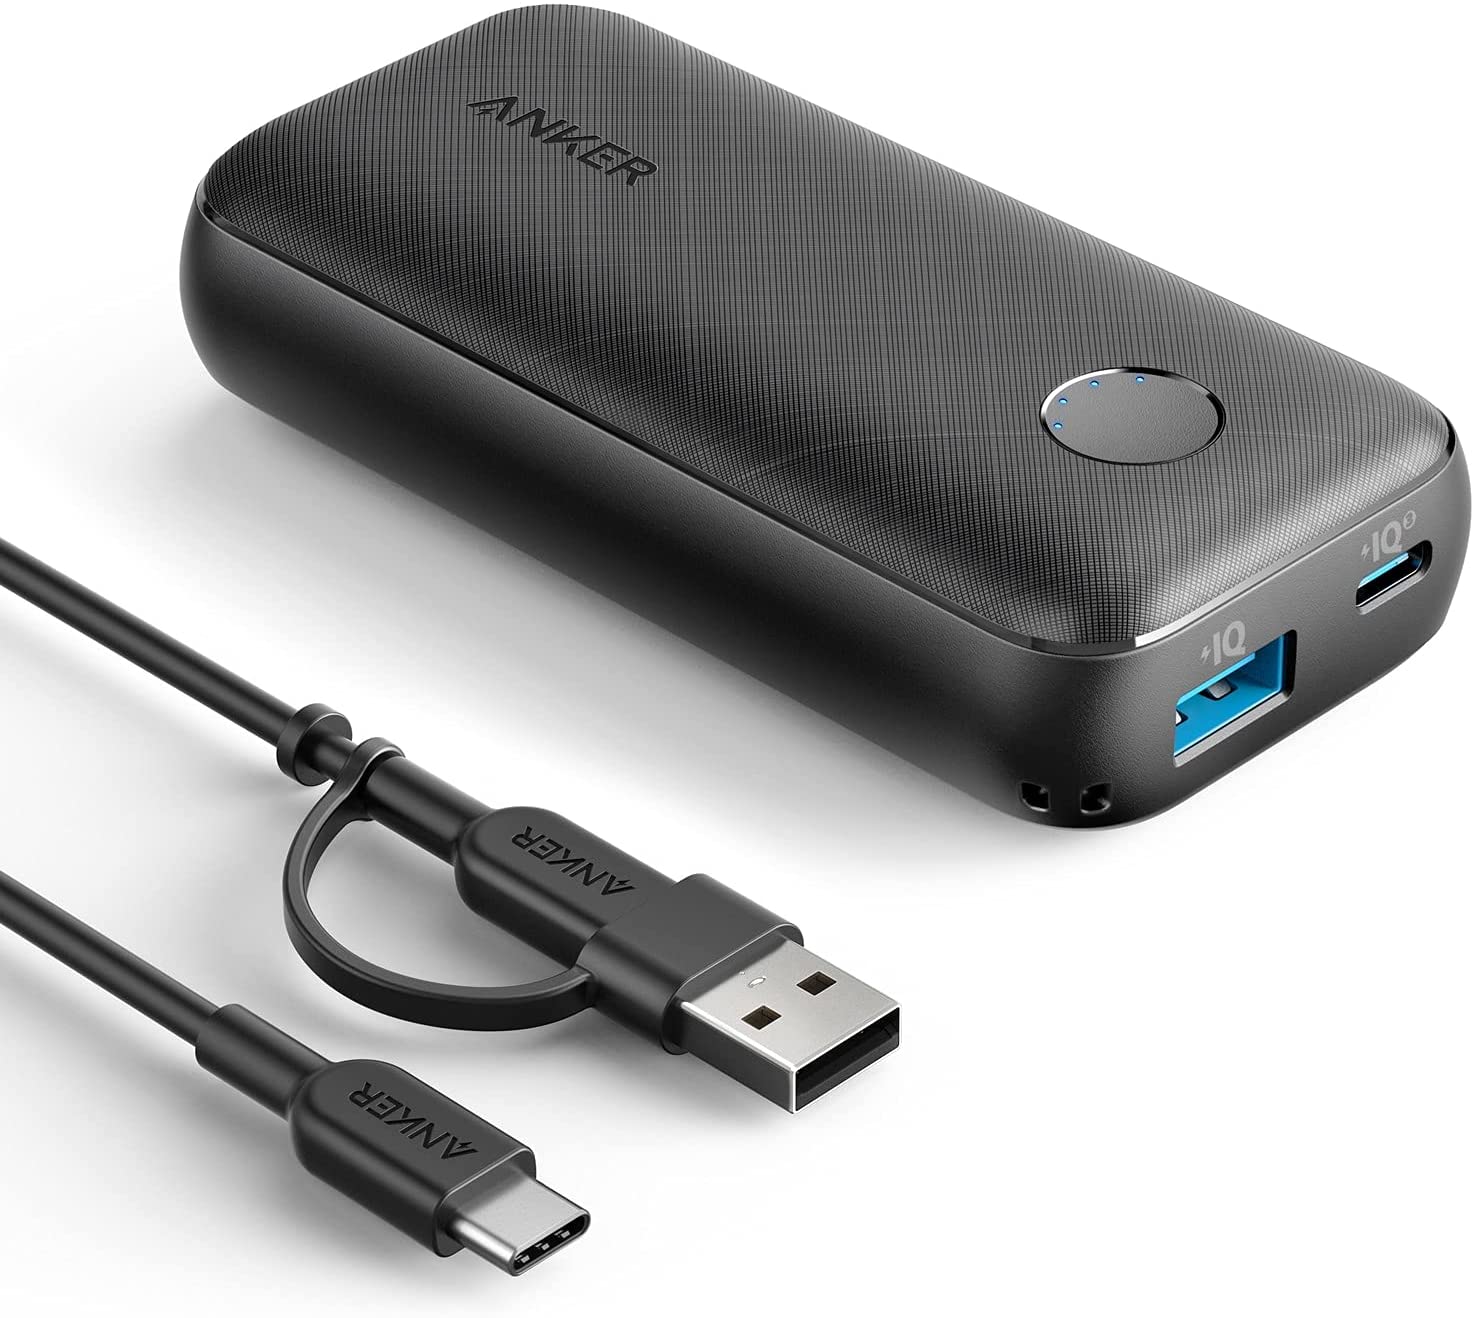 Anker Portable Charger, 10000mAh Power Bank with USB-C – Just $32.49 at Amazon